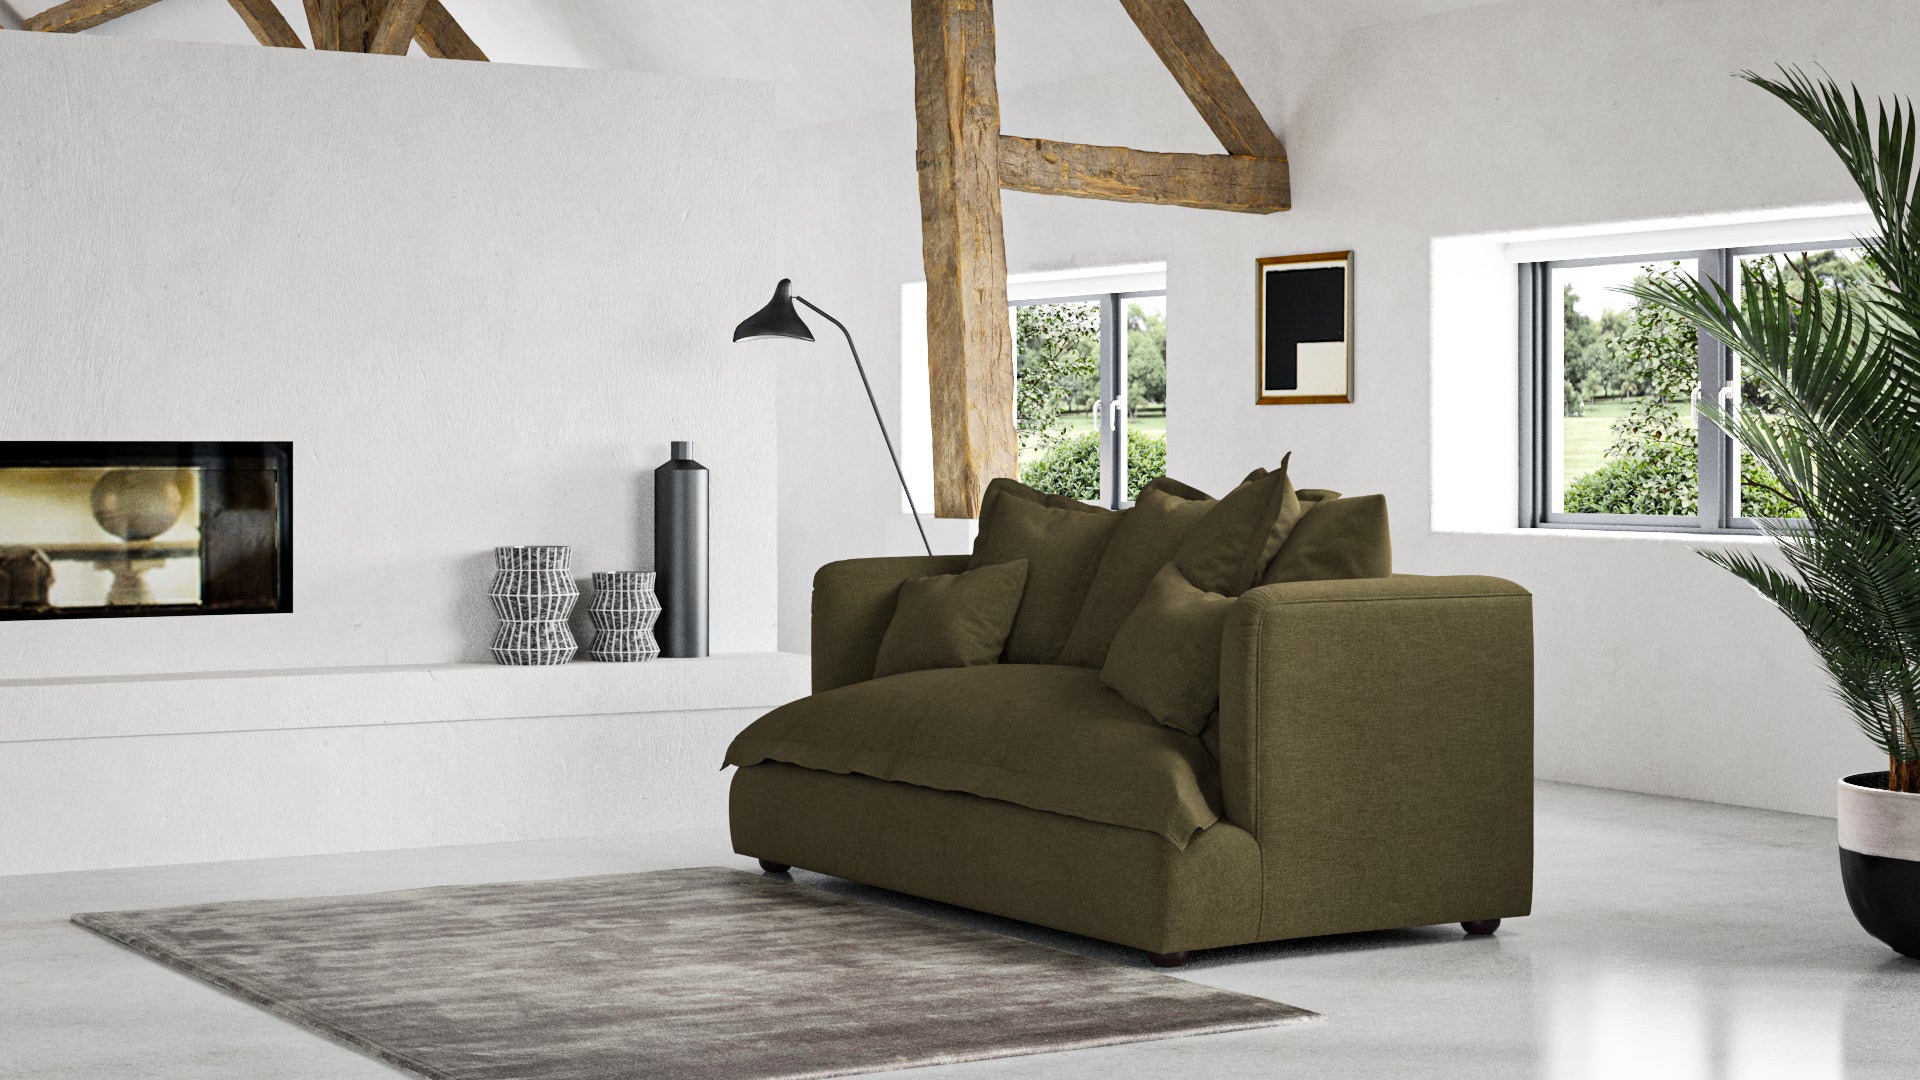 Tetrad Amiie sofabed in Sahara Military. Add style and versatility to your room with this chic and comfy sofabed.